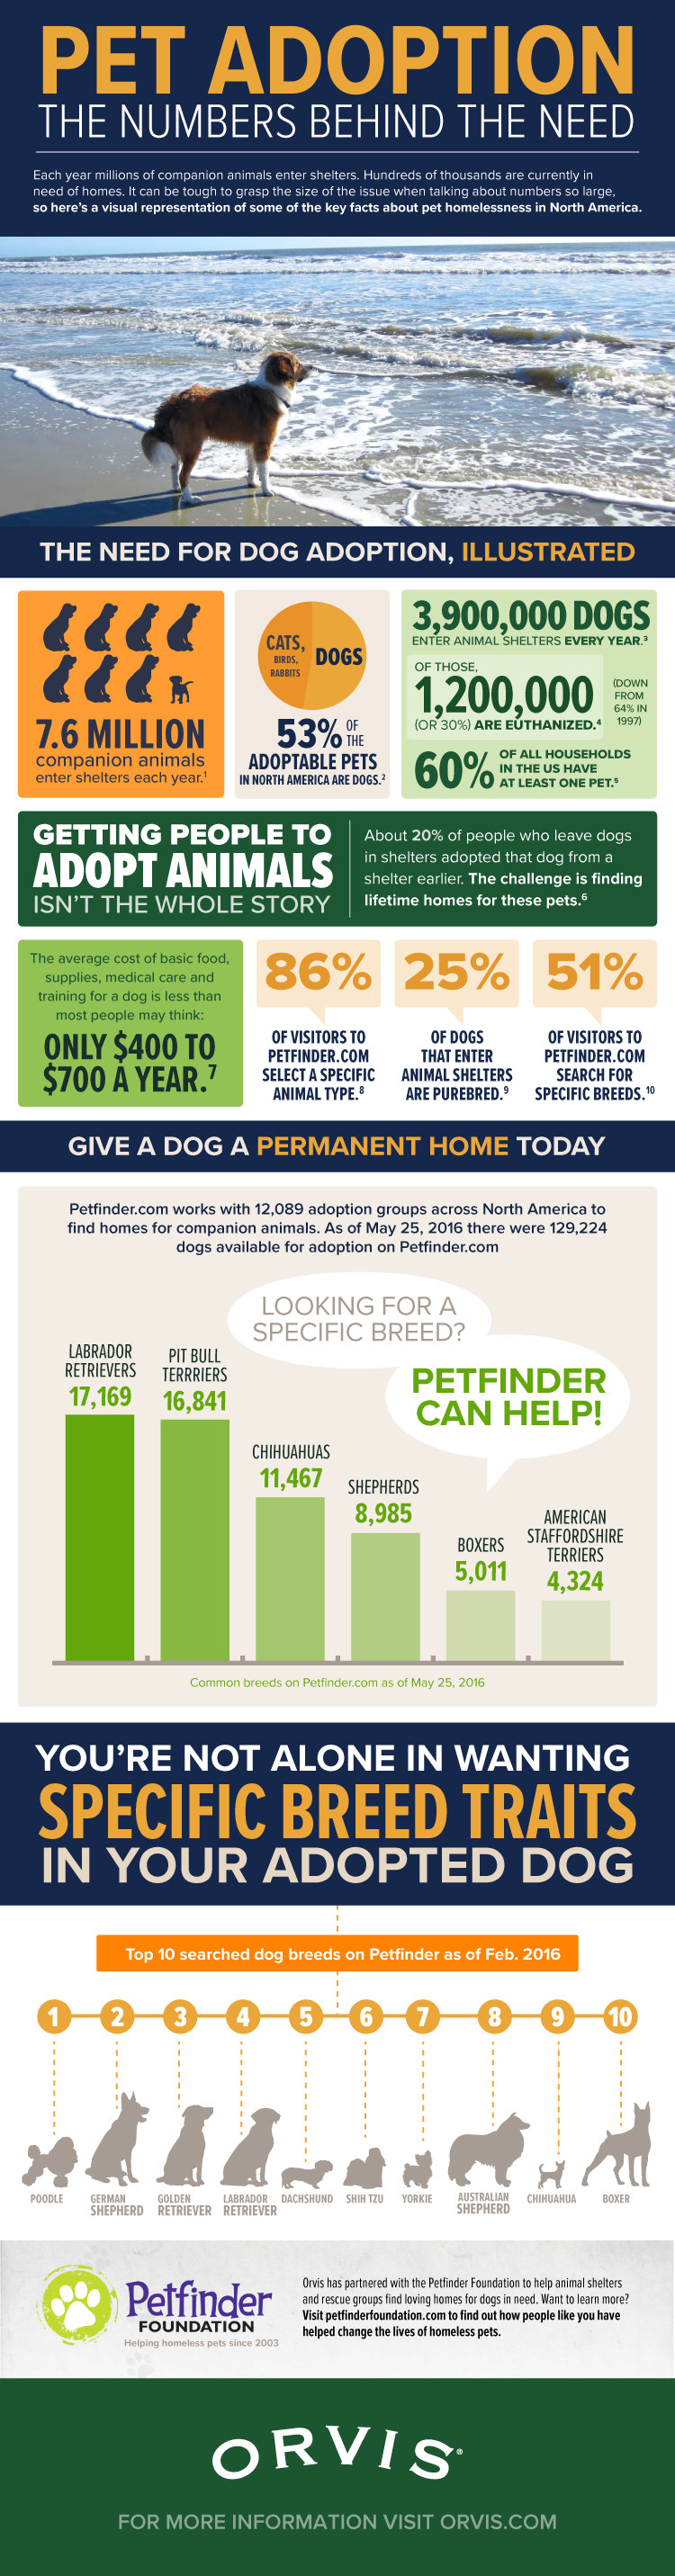 Pet Adoption: The Numbers Behind the Need